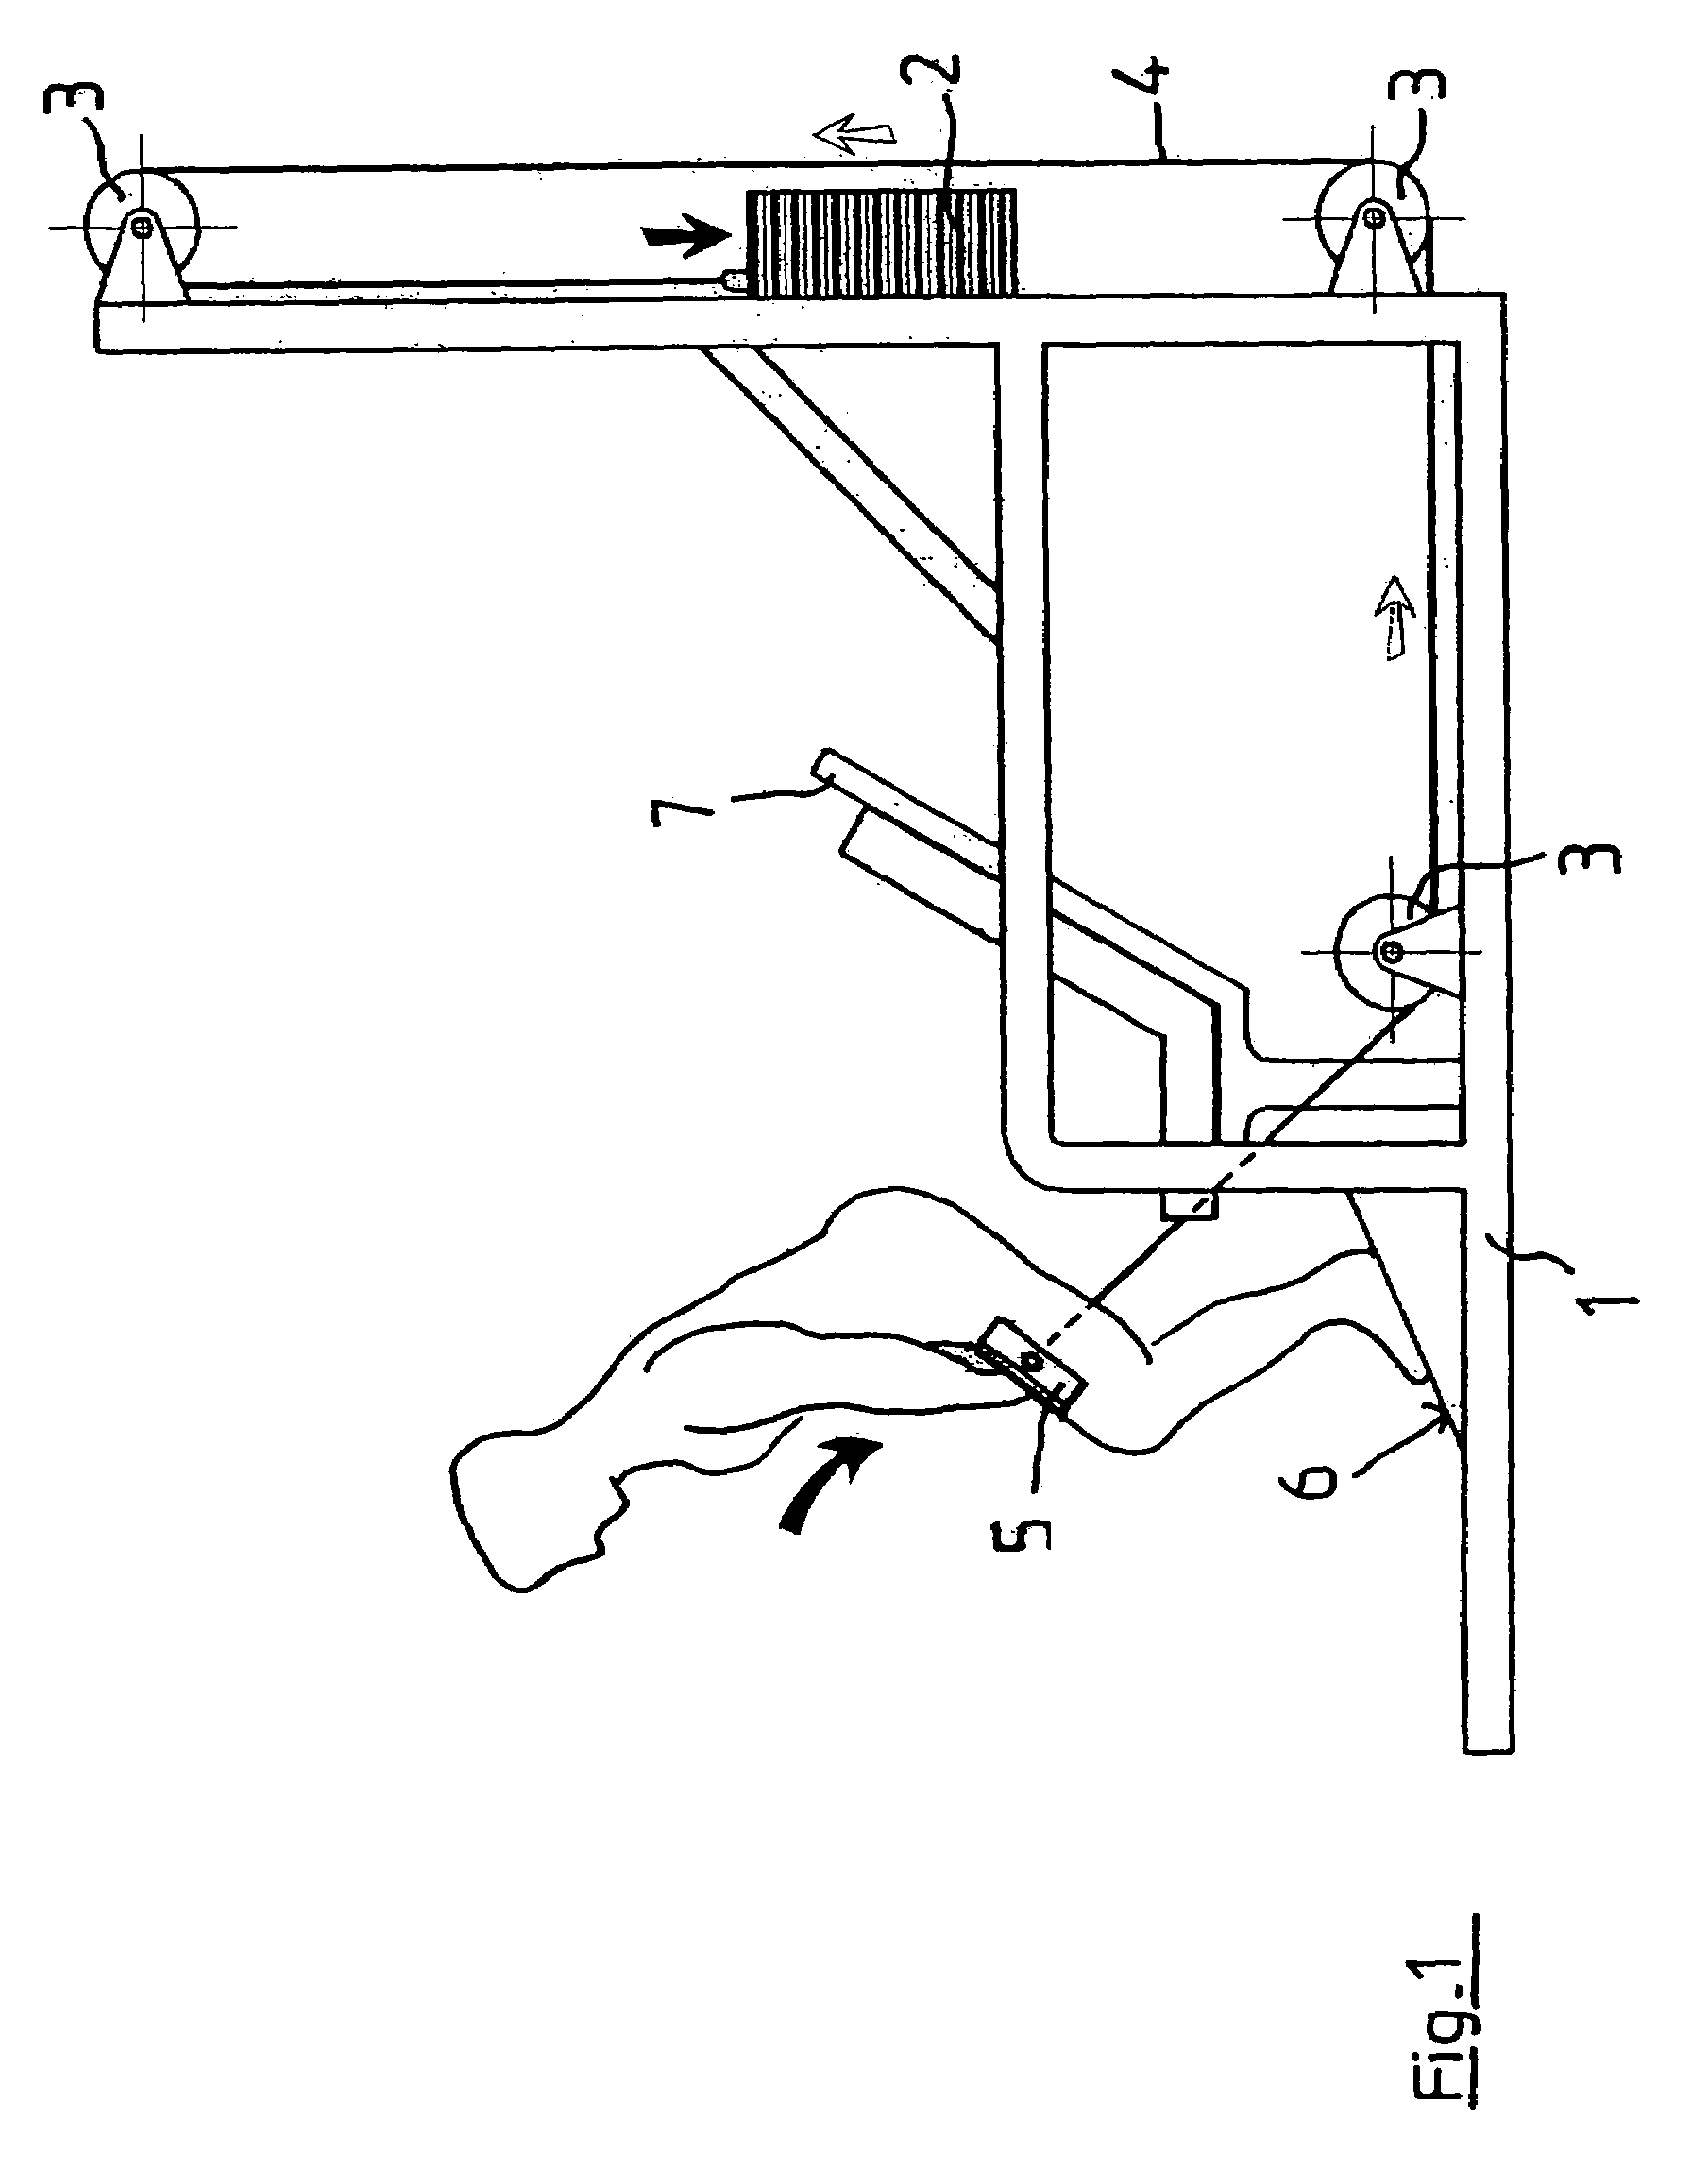 Device for person's muscular exercise